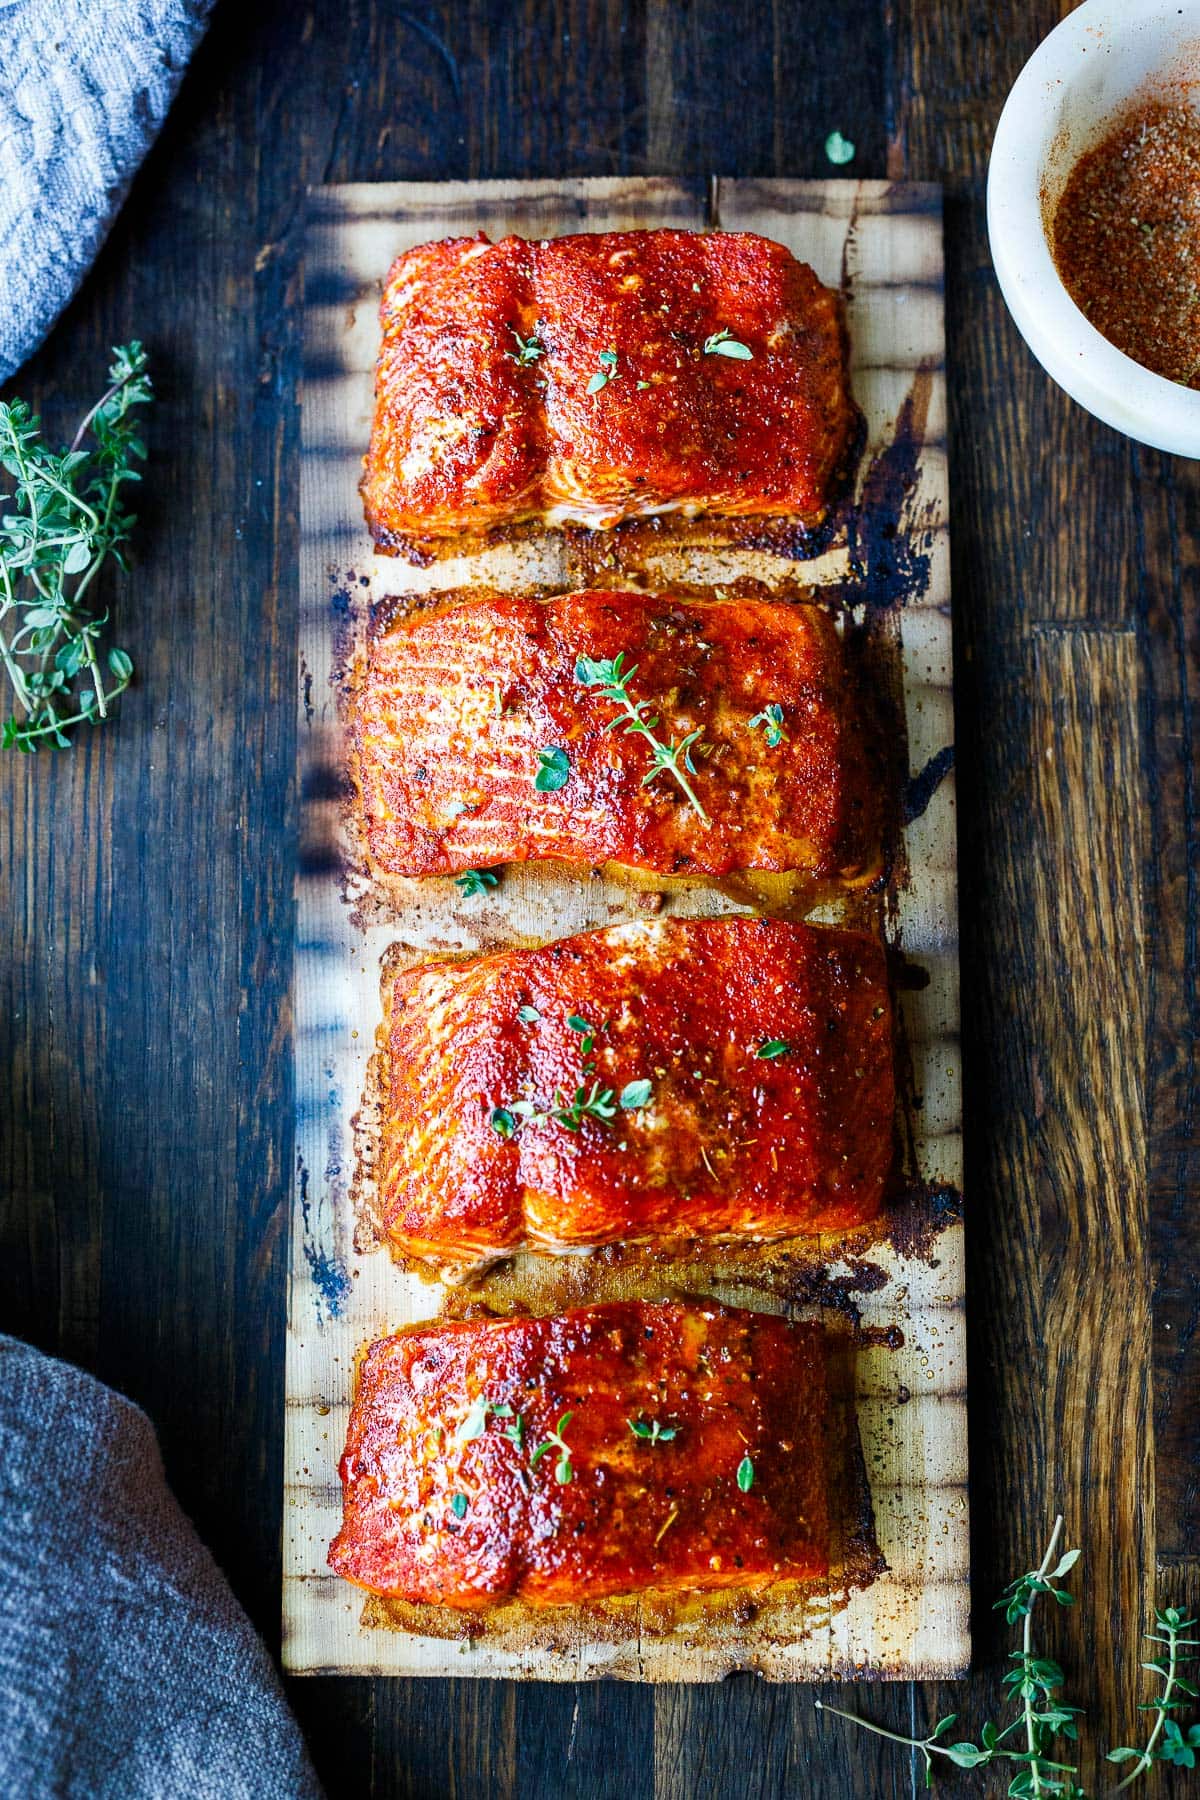 This recipe for Cedar Plank Salmon couldn't be any easier! Infuse wild salmon with subtle smoke and our flavorful Northwest Salmon Rub, using a cedar plank on the grill. No fuss with easy clean up. 